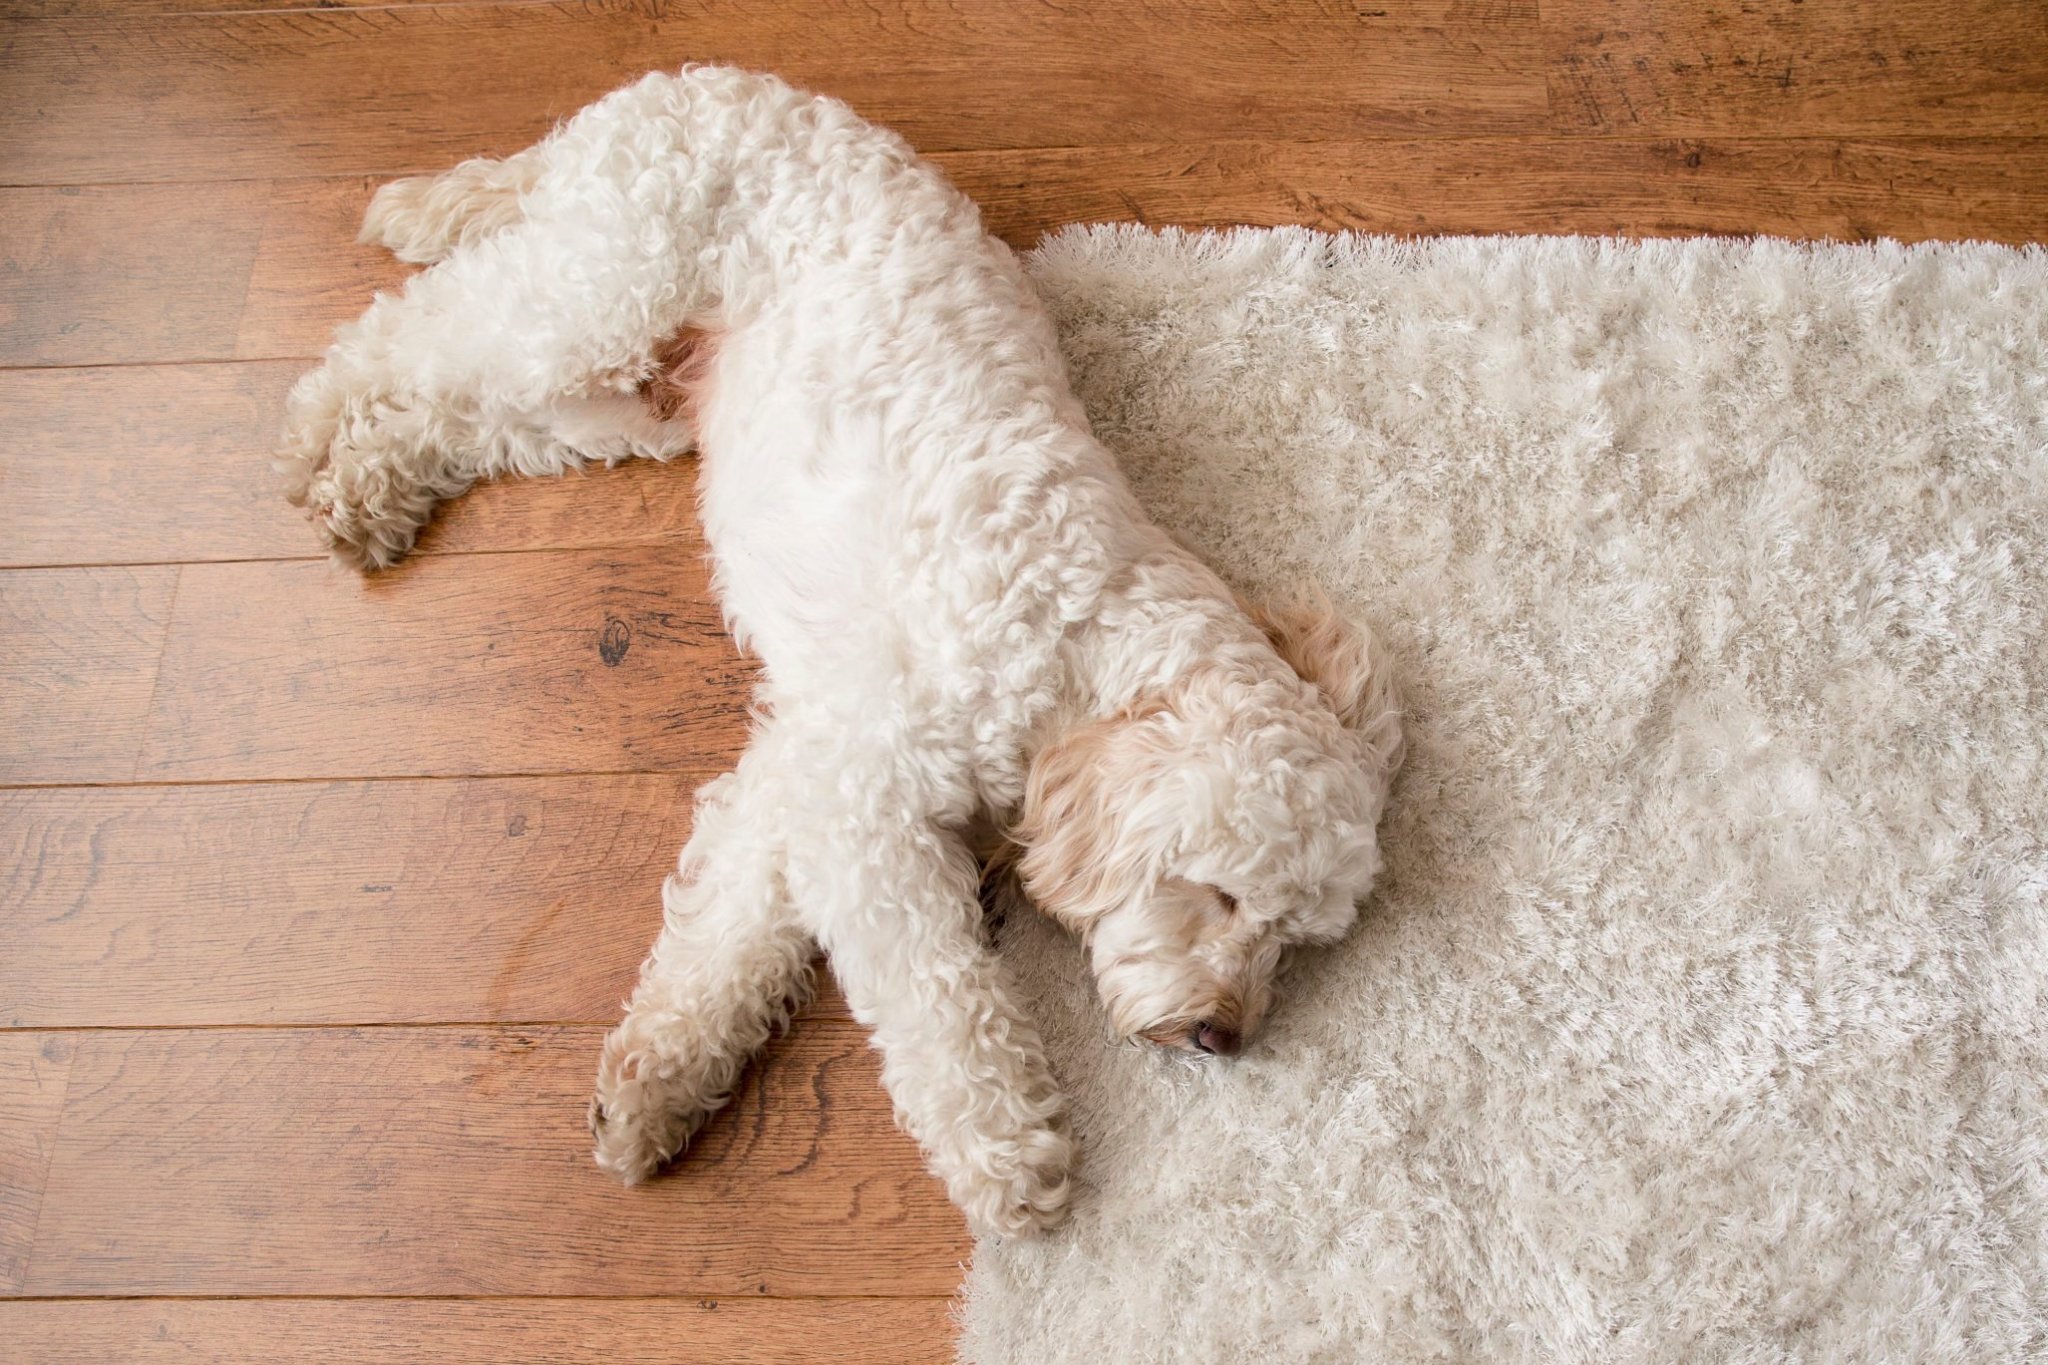 Why Do Dogs Circle Before Lying Down?